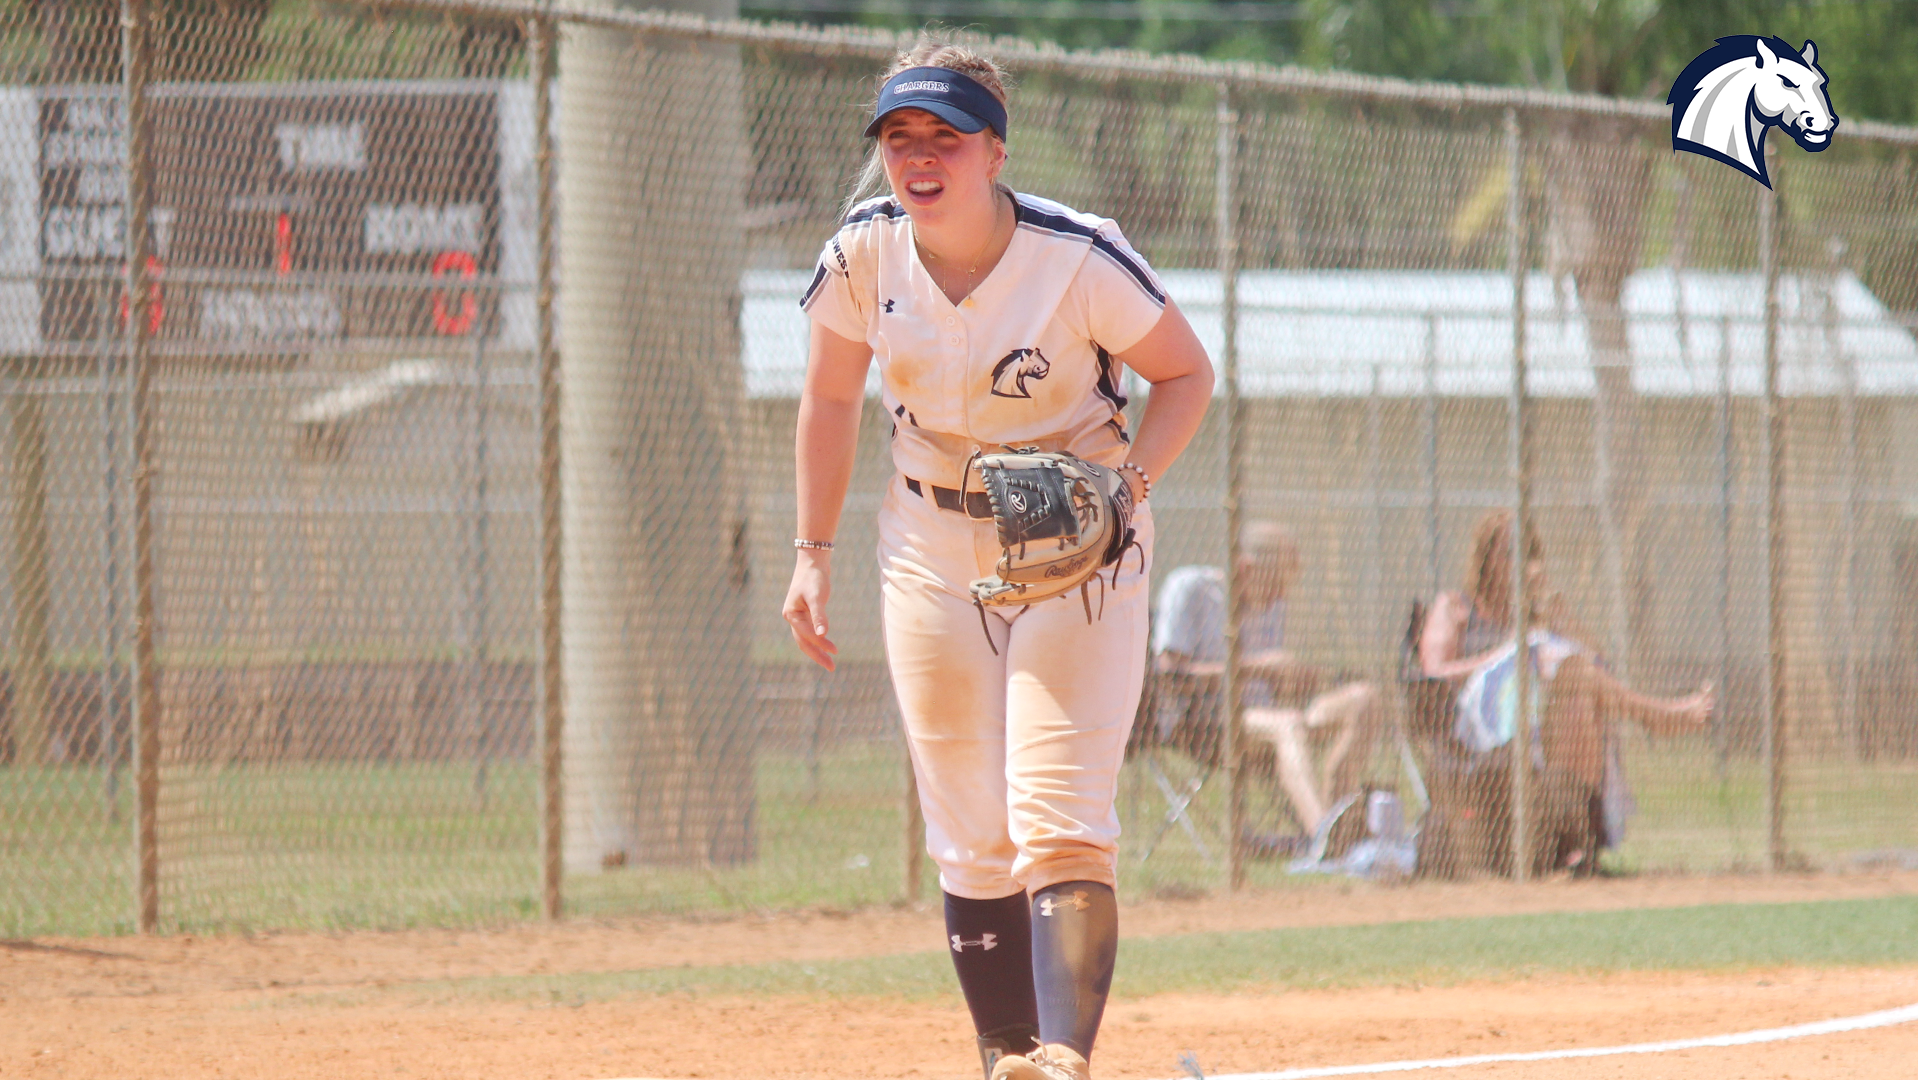 Chargers fall to Trevecca Nazarene in doubleheader action on Saturday